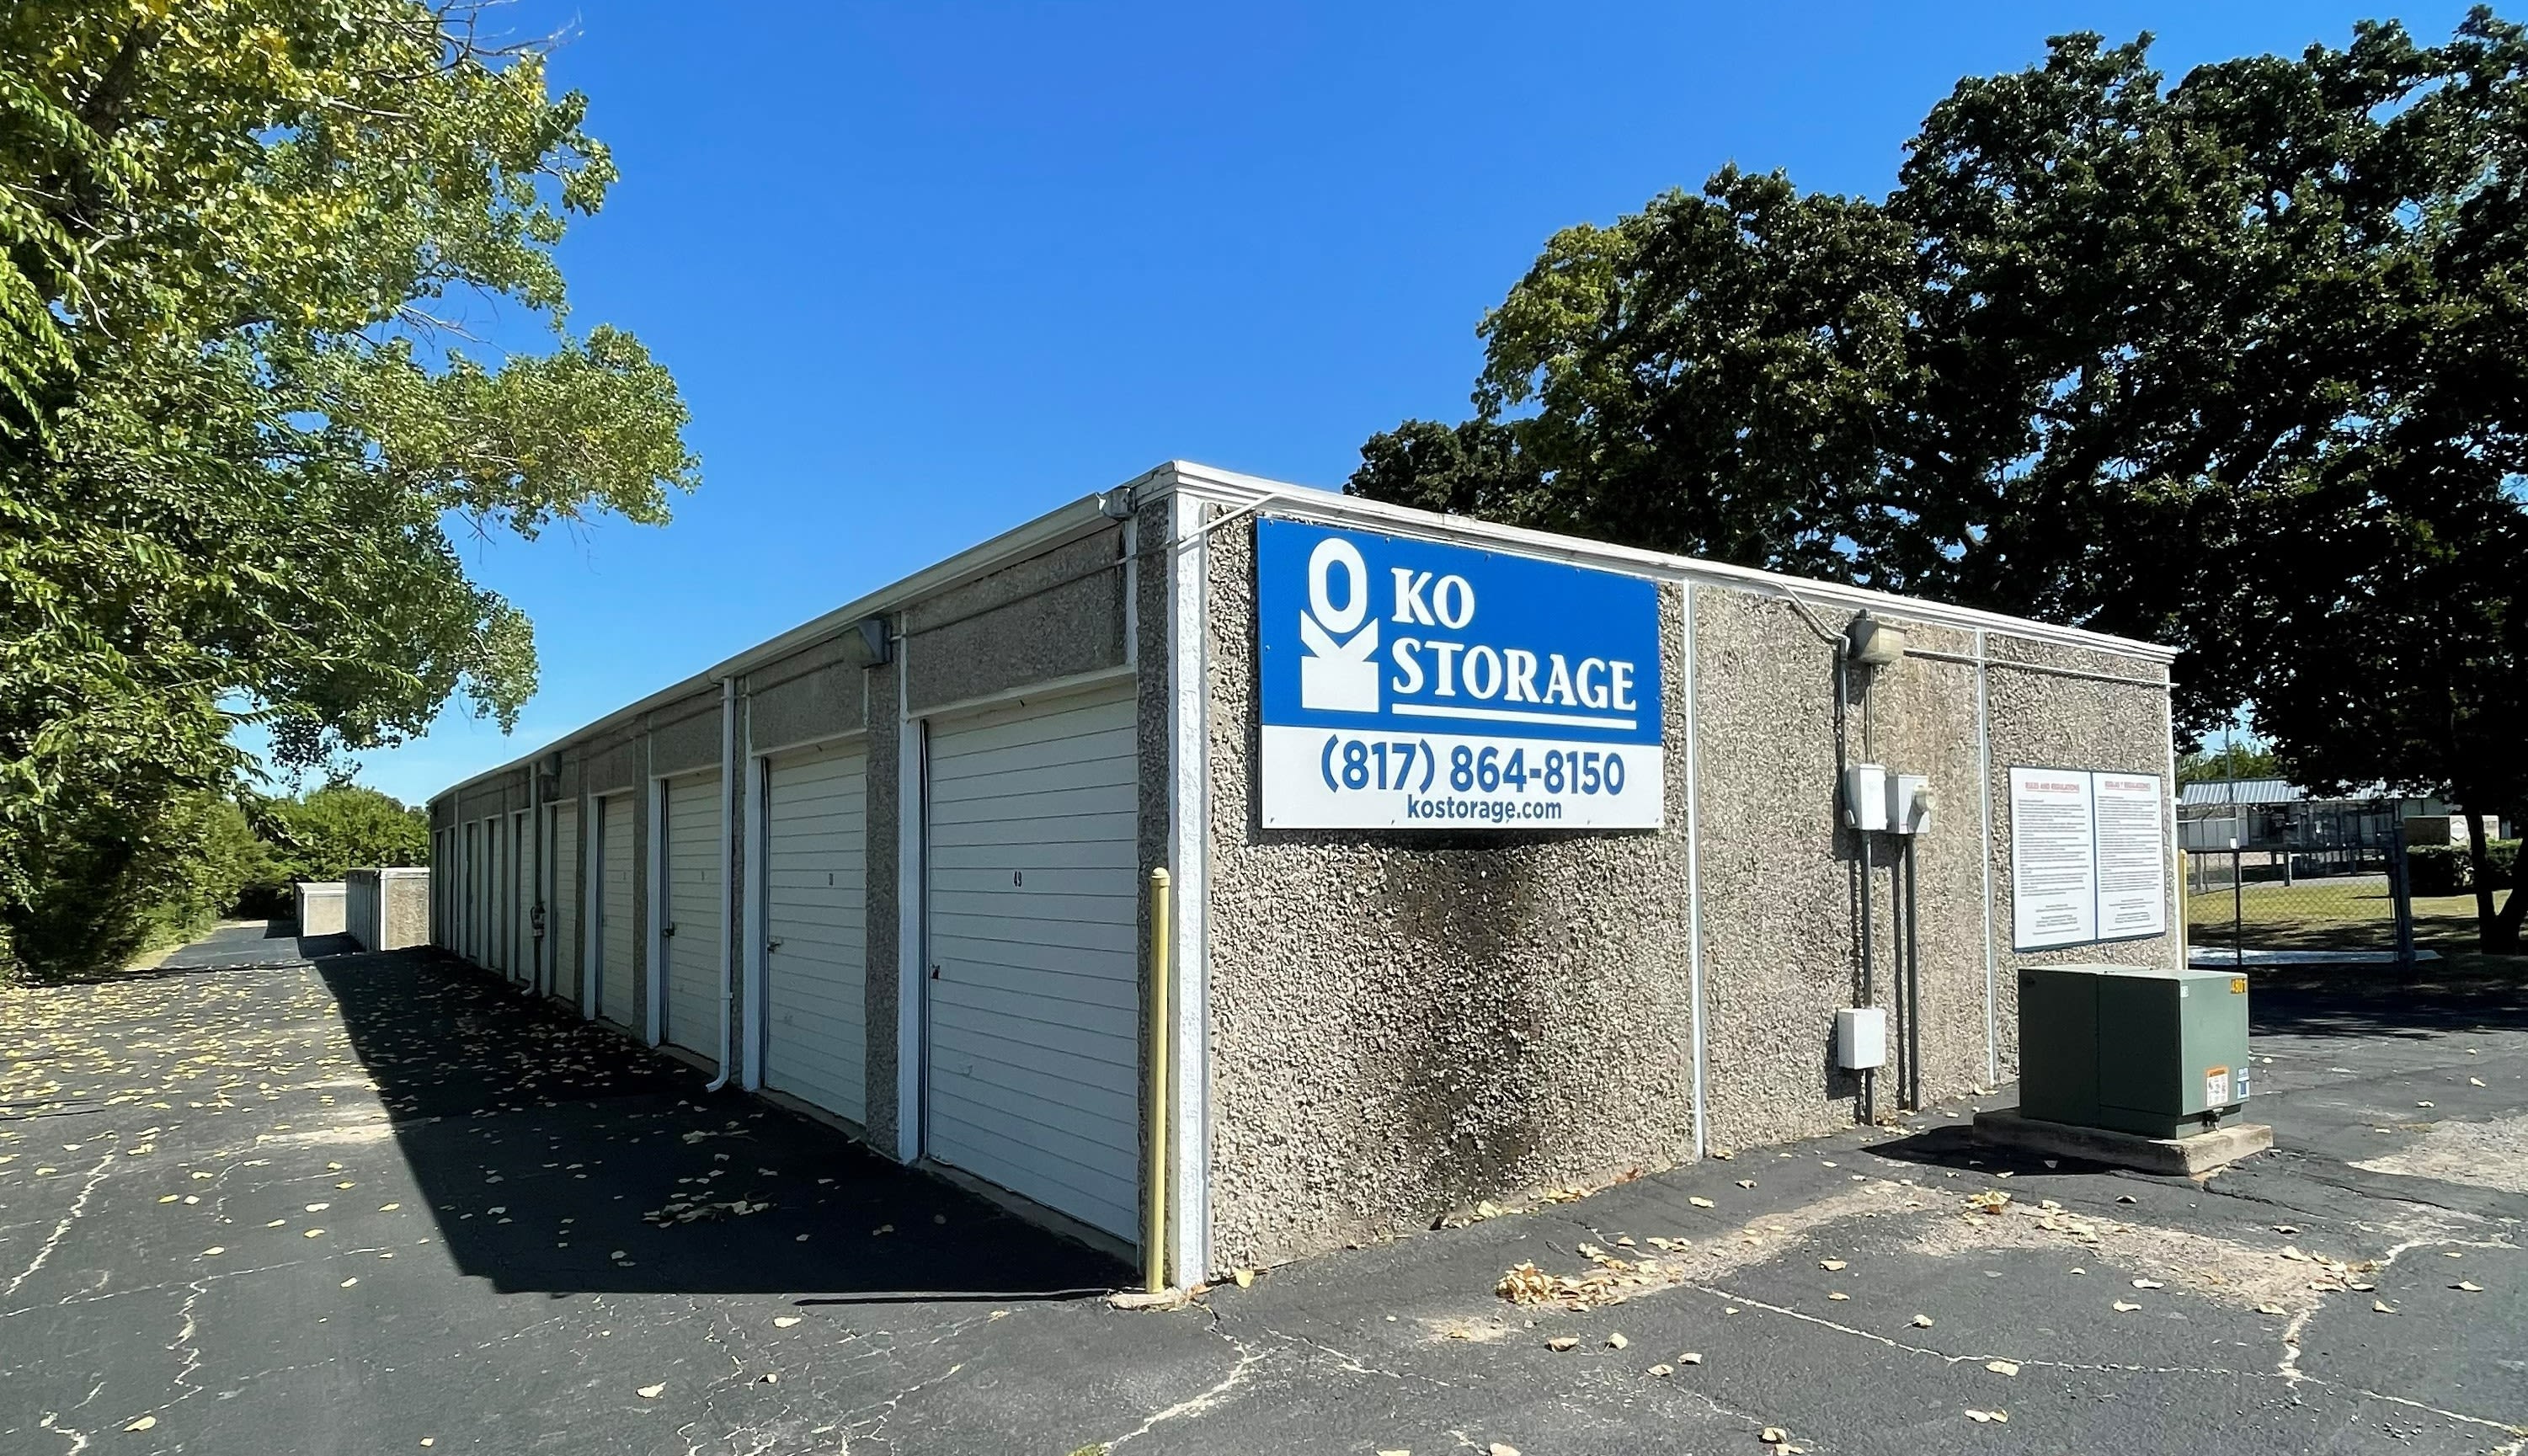 Features at KO Storage in Weatherford, Texas